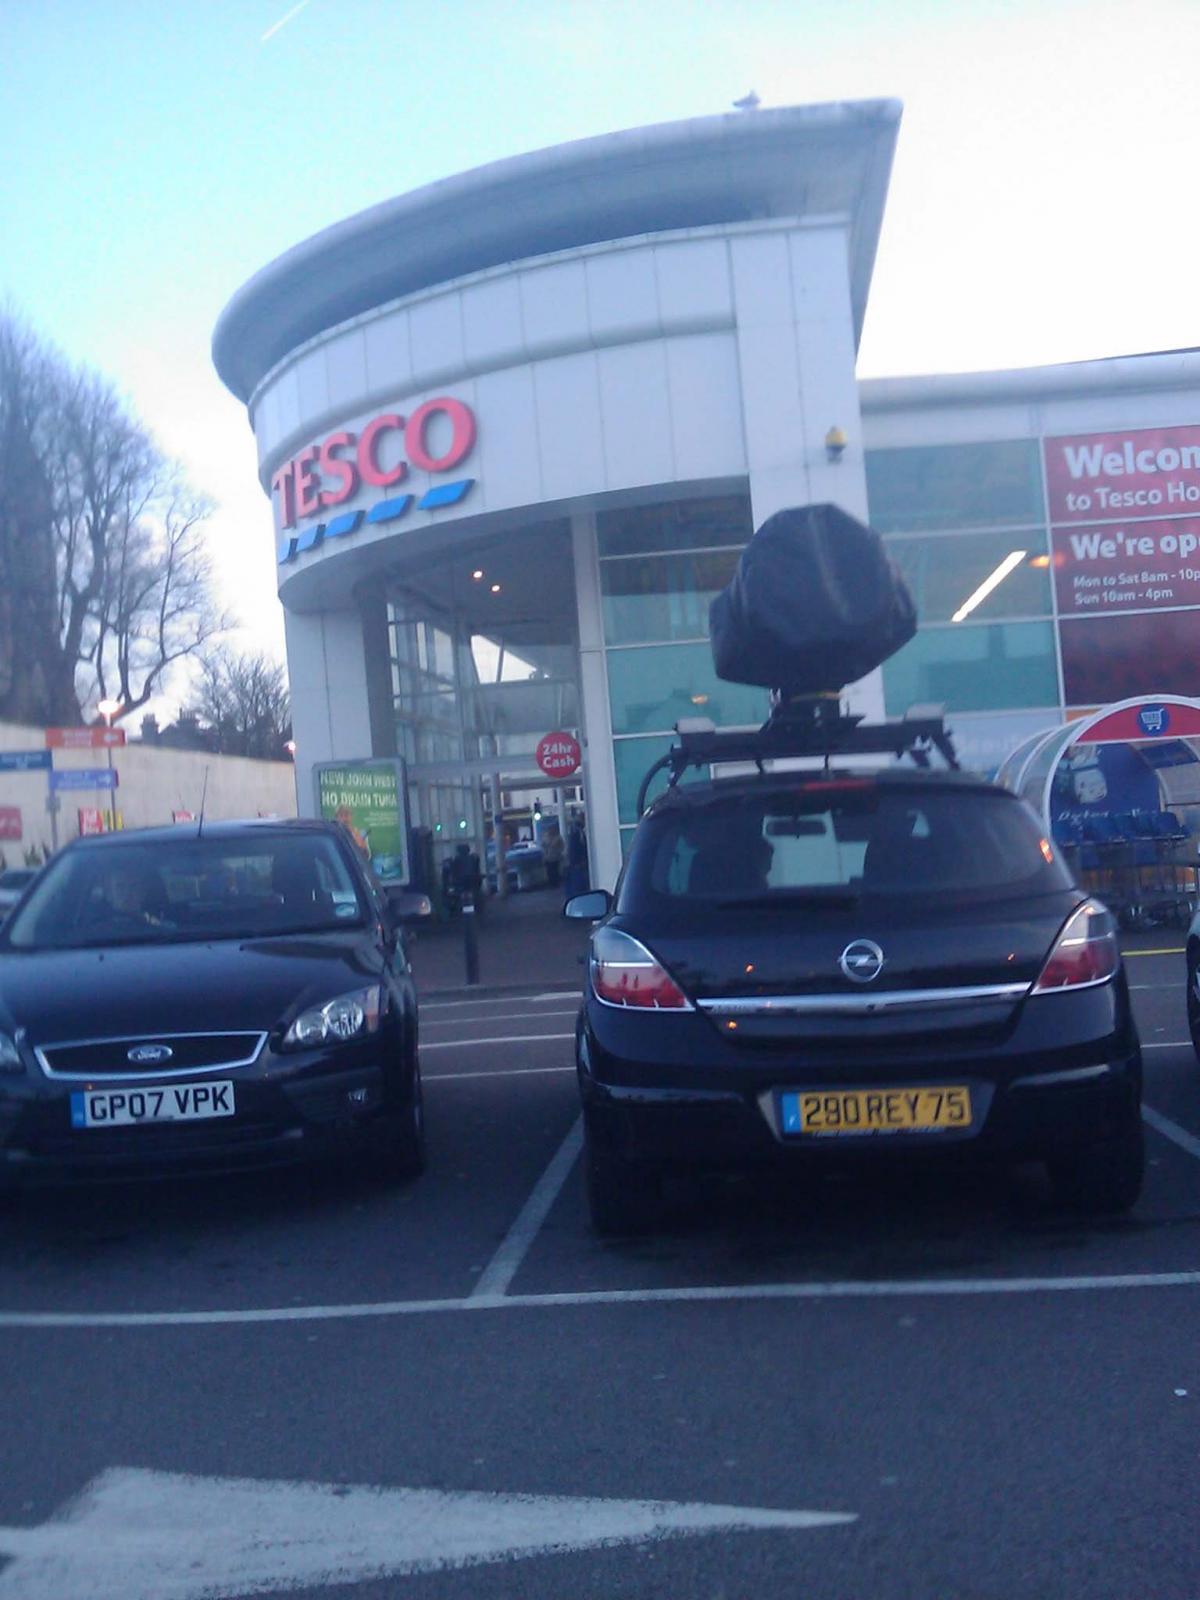 Dave Lockie took this picture of the car outside Tesco Express in Hove on April 11 and posted it to his site www.divydovy.com.